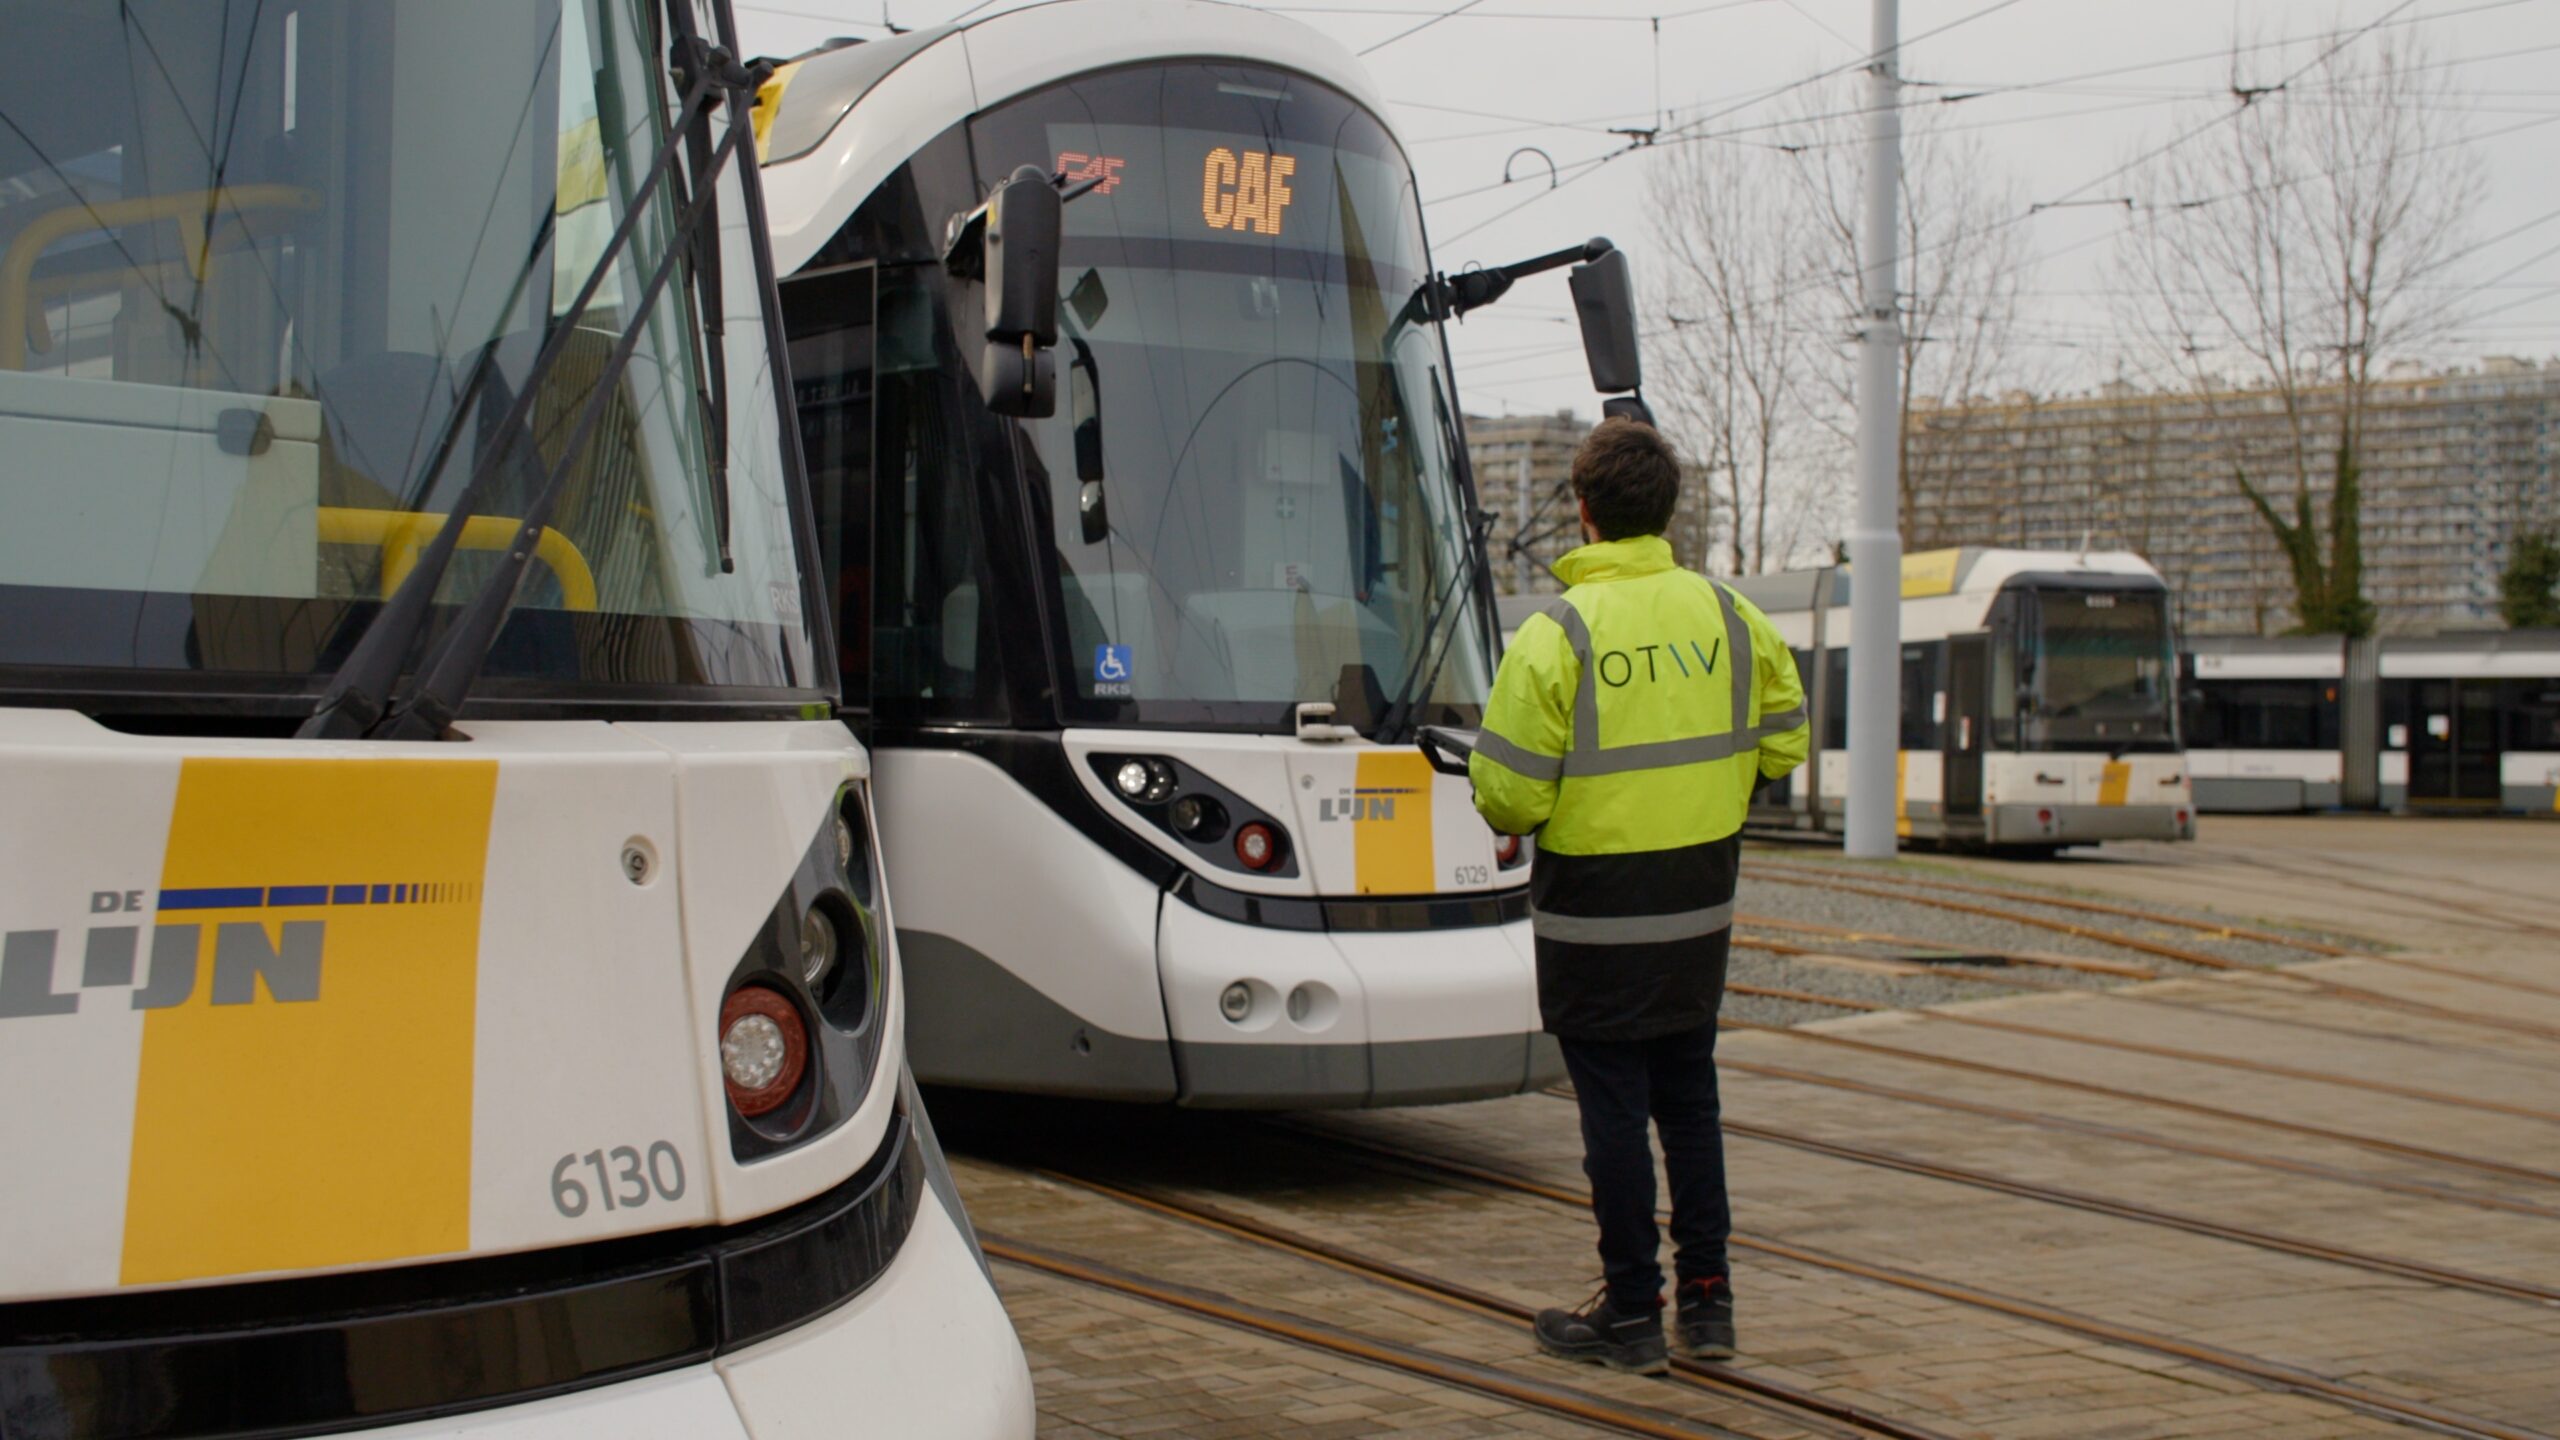 The collaboration with OTIV, a start-up based in Ghent, allows De Lijn to test new technologies to improve the safety and efficiency of its trams